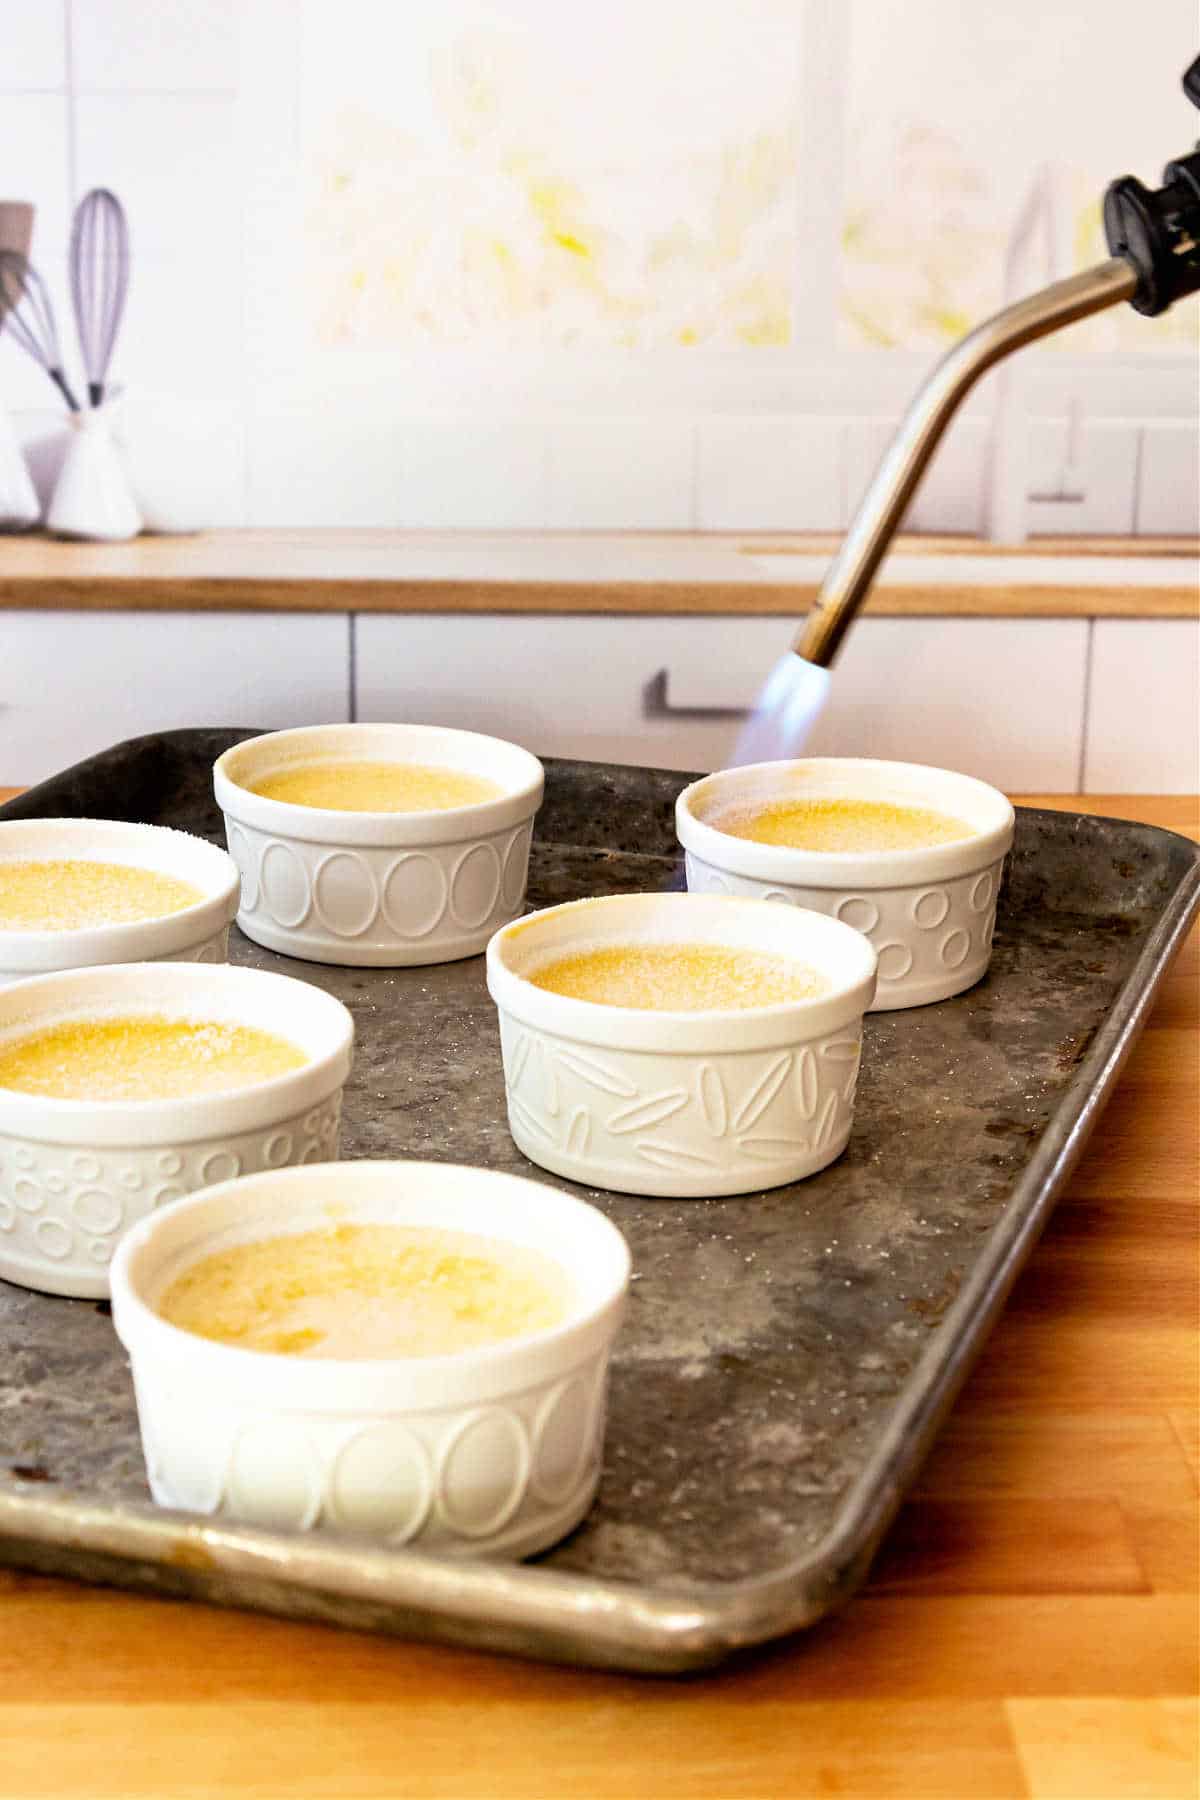 A tray of creme brulee in white ramekins. The nozzle of a blowtorch can be seen in the upper right with a blue flame coming out, melting and caramelizing the sugar on one of the desserts.